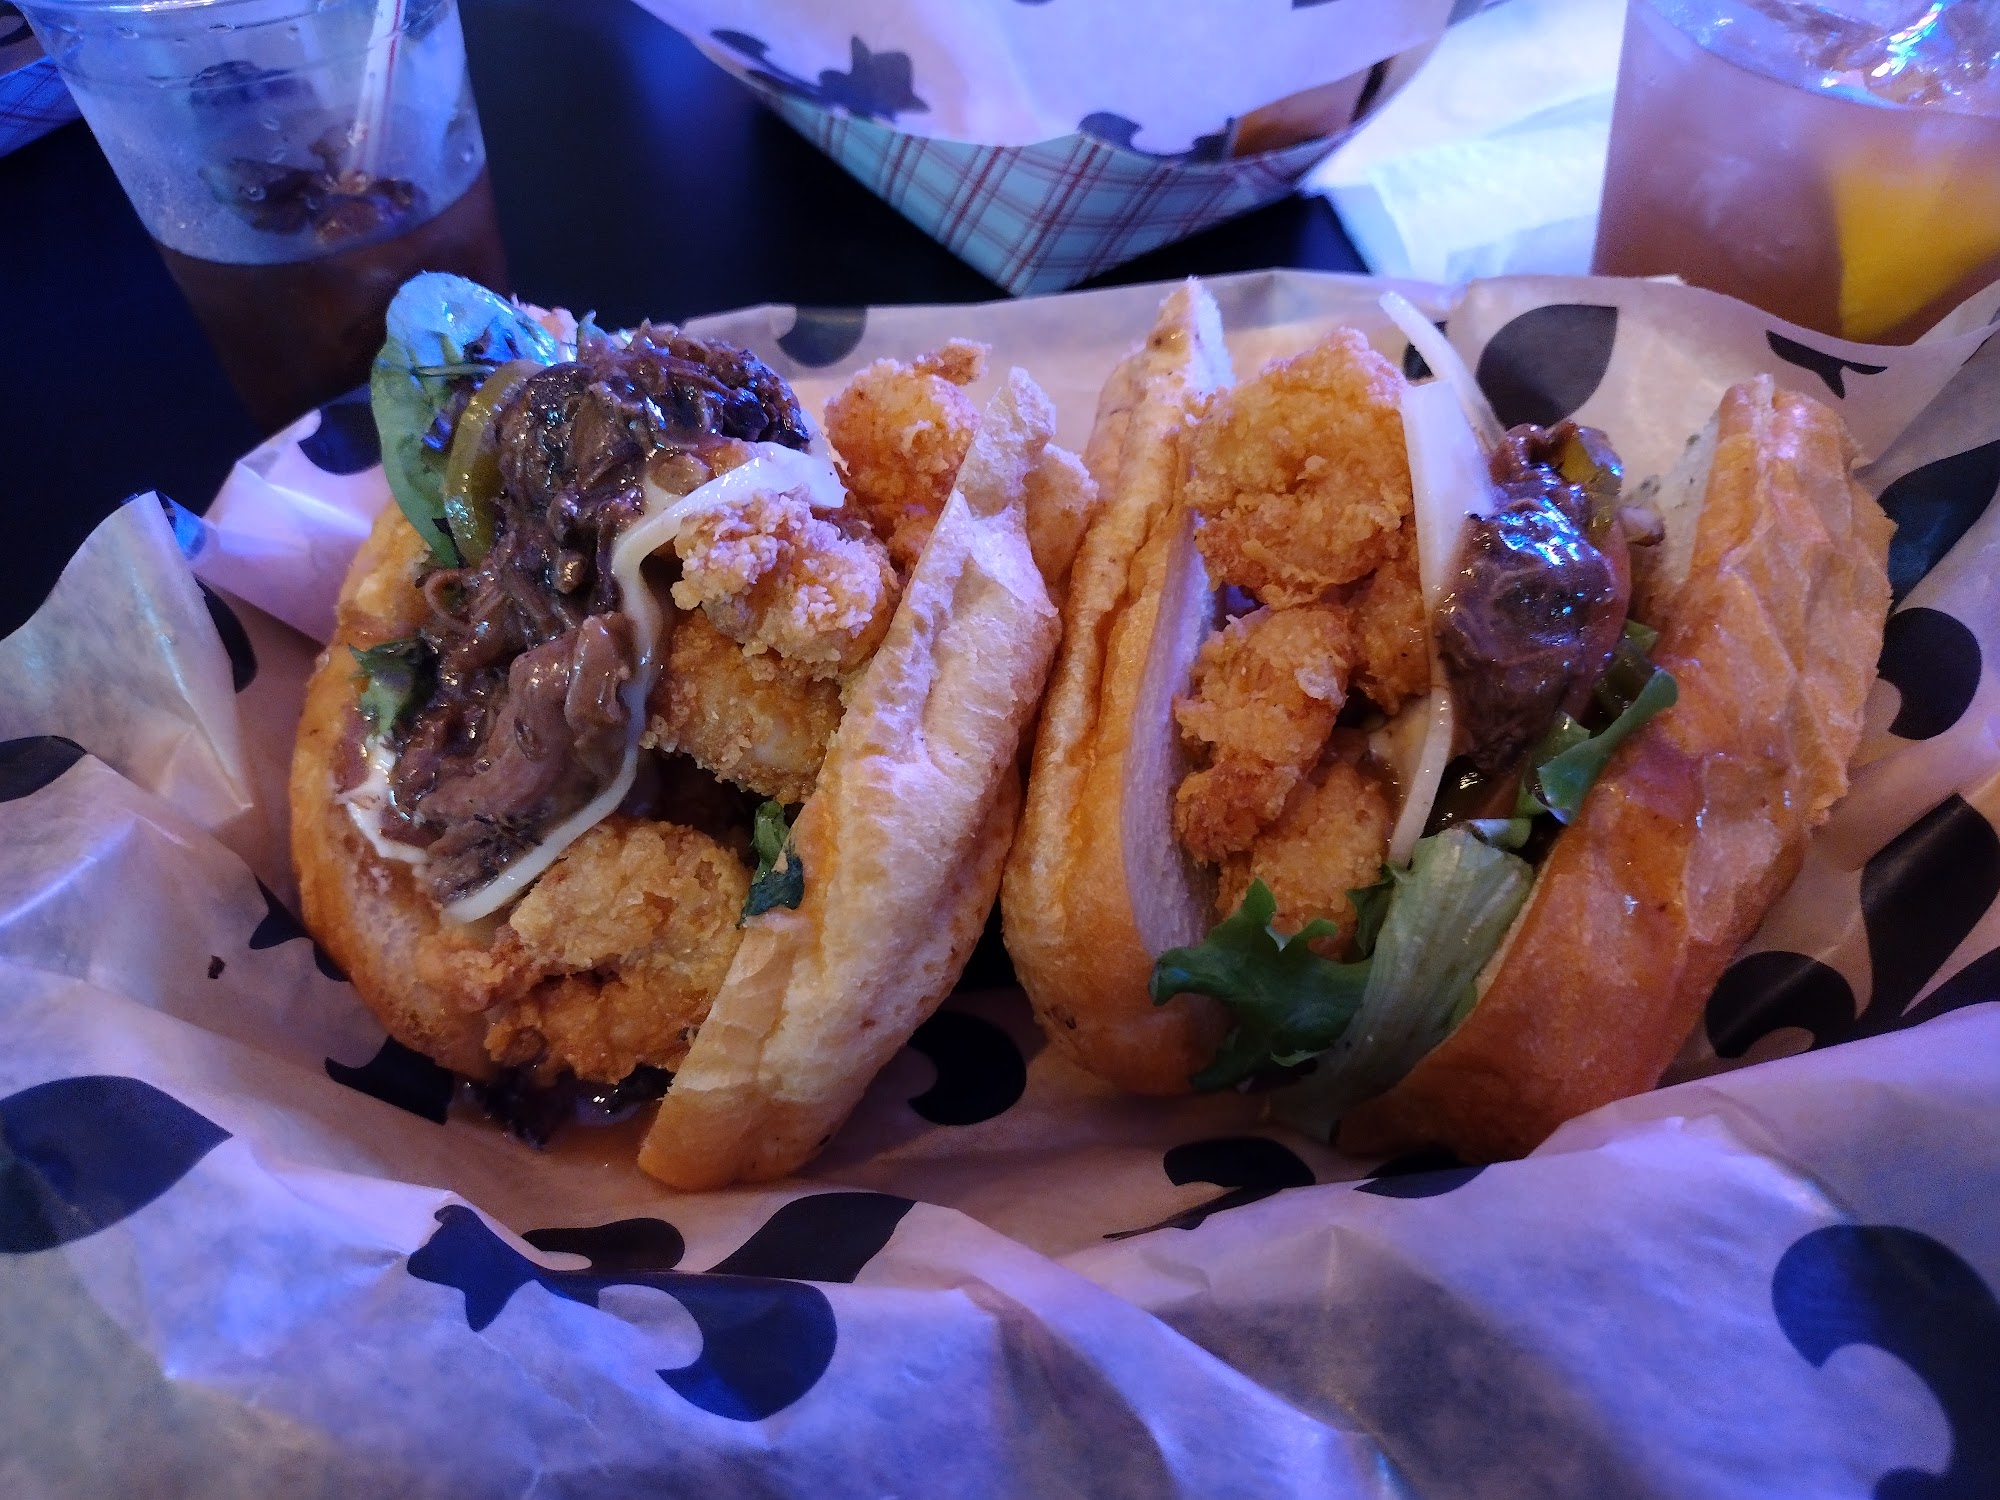 Voodoo Tavern and PoBoys